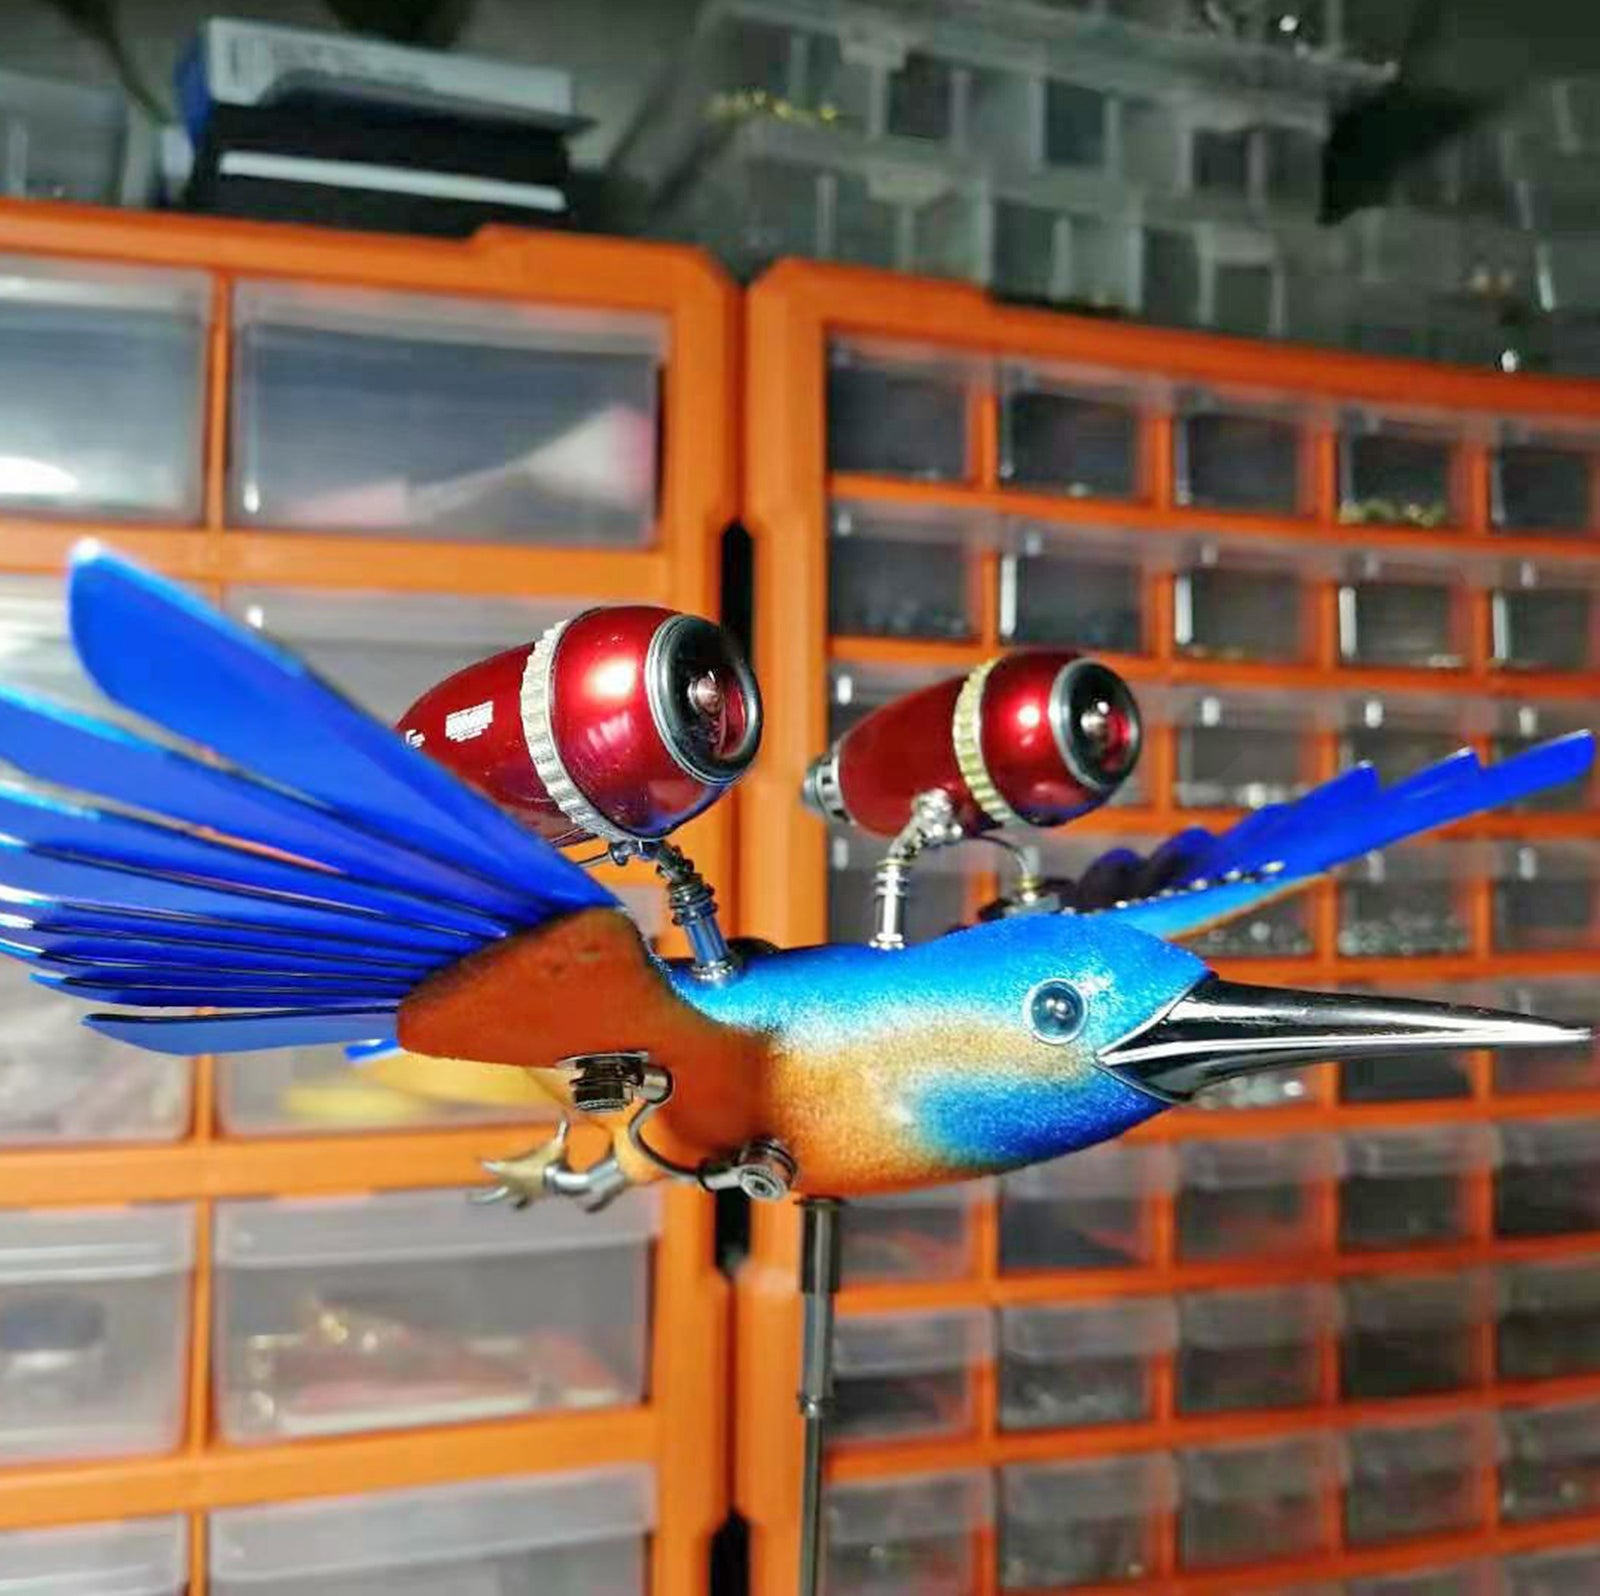 Steampunk Kingfisher Bird Animals Metal 3D Model Kits for Collection